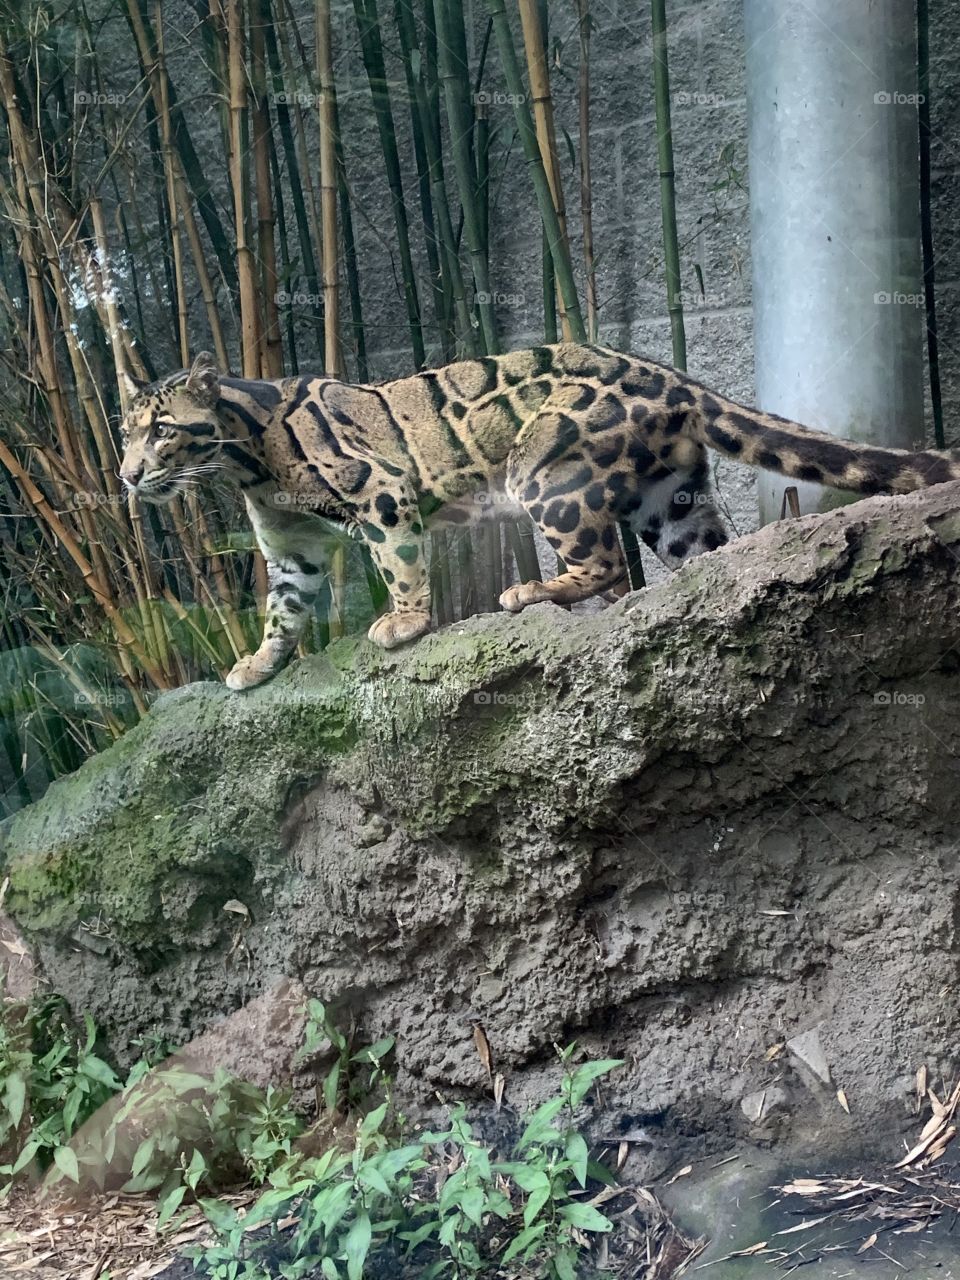 Clouded leopard from zoo. 